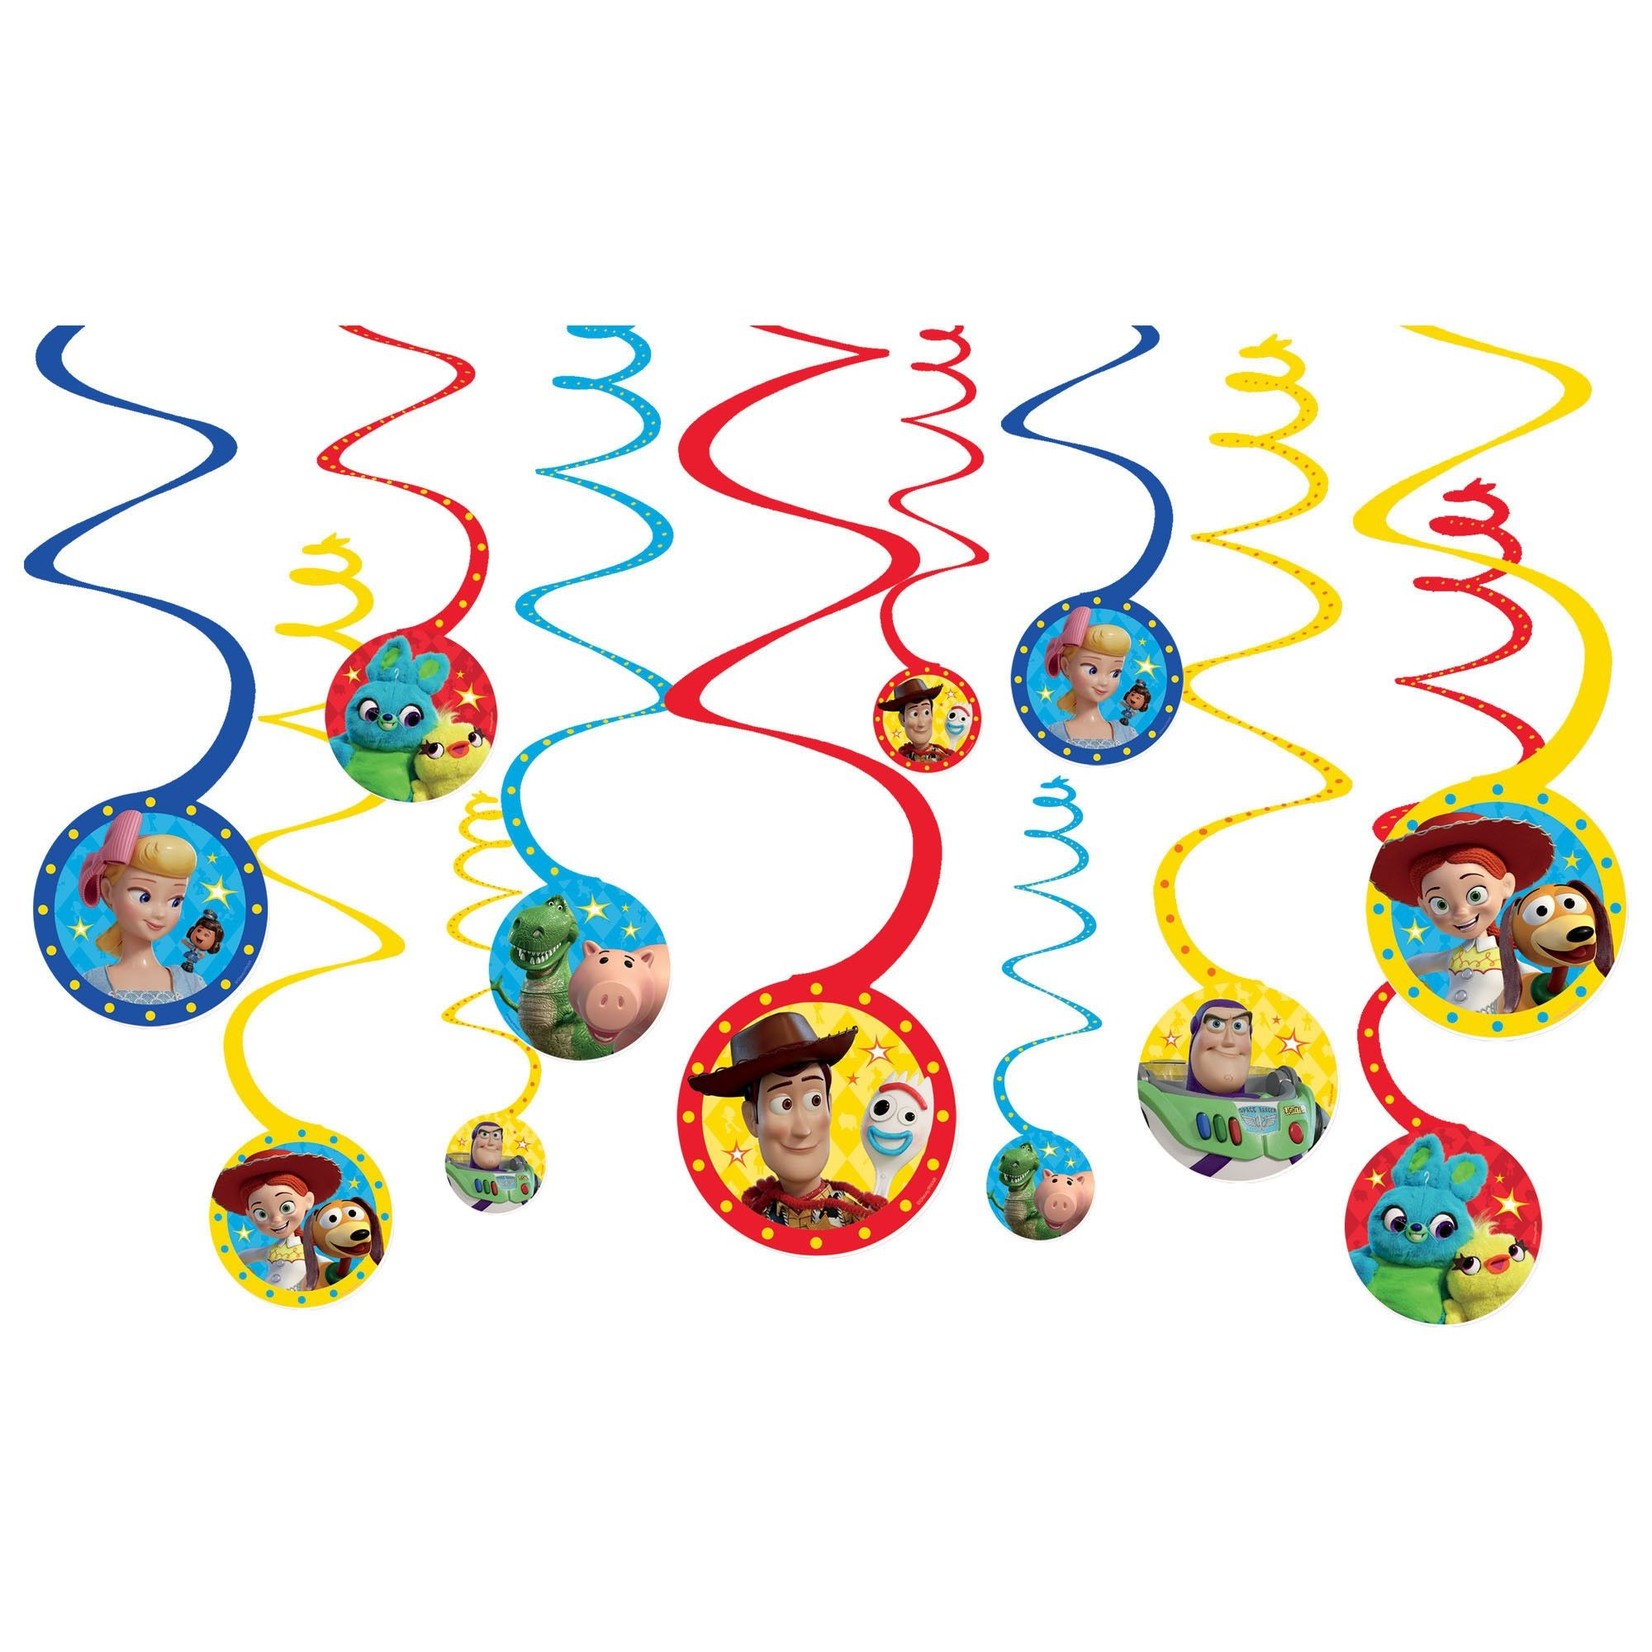 Toy Story 4 Spiral Decorations